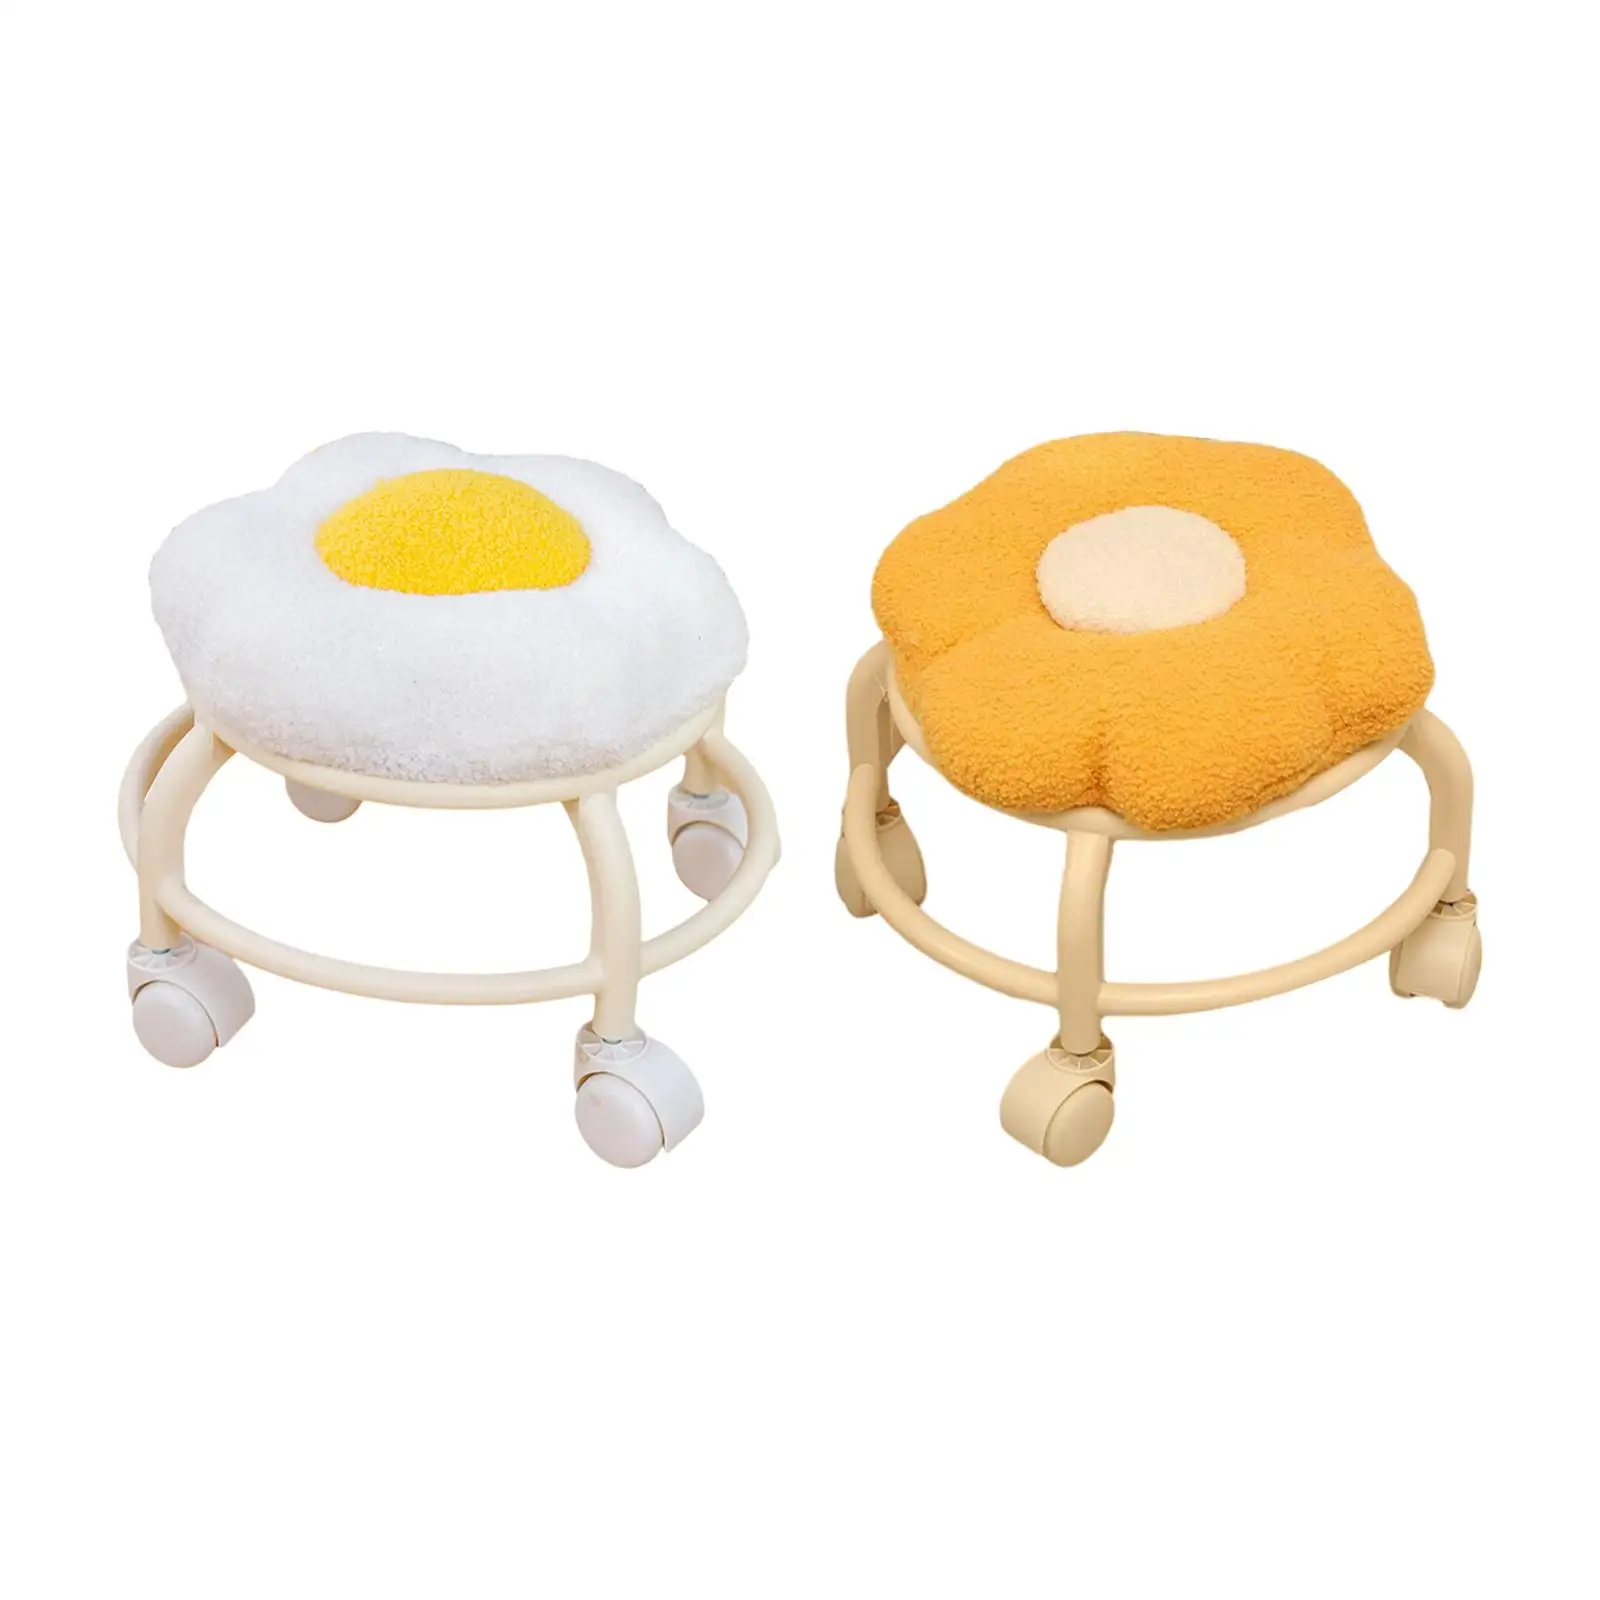 Low Rolling Stool with Wheels Flower Shape Comfortable Cute Low Small Stool Footrest for Garage Bedside Porch Kitchen Playroom